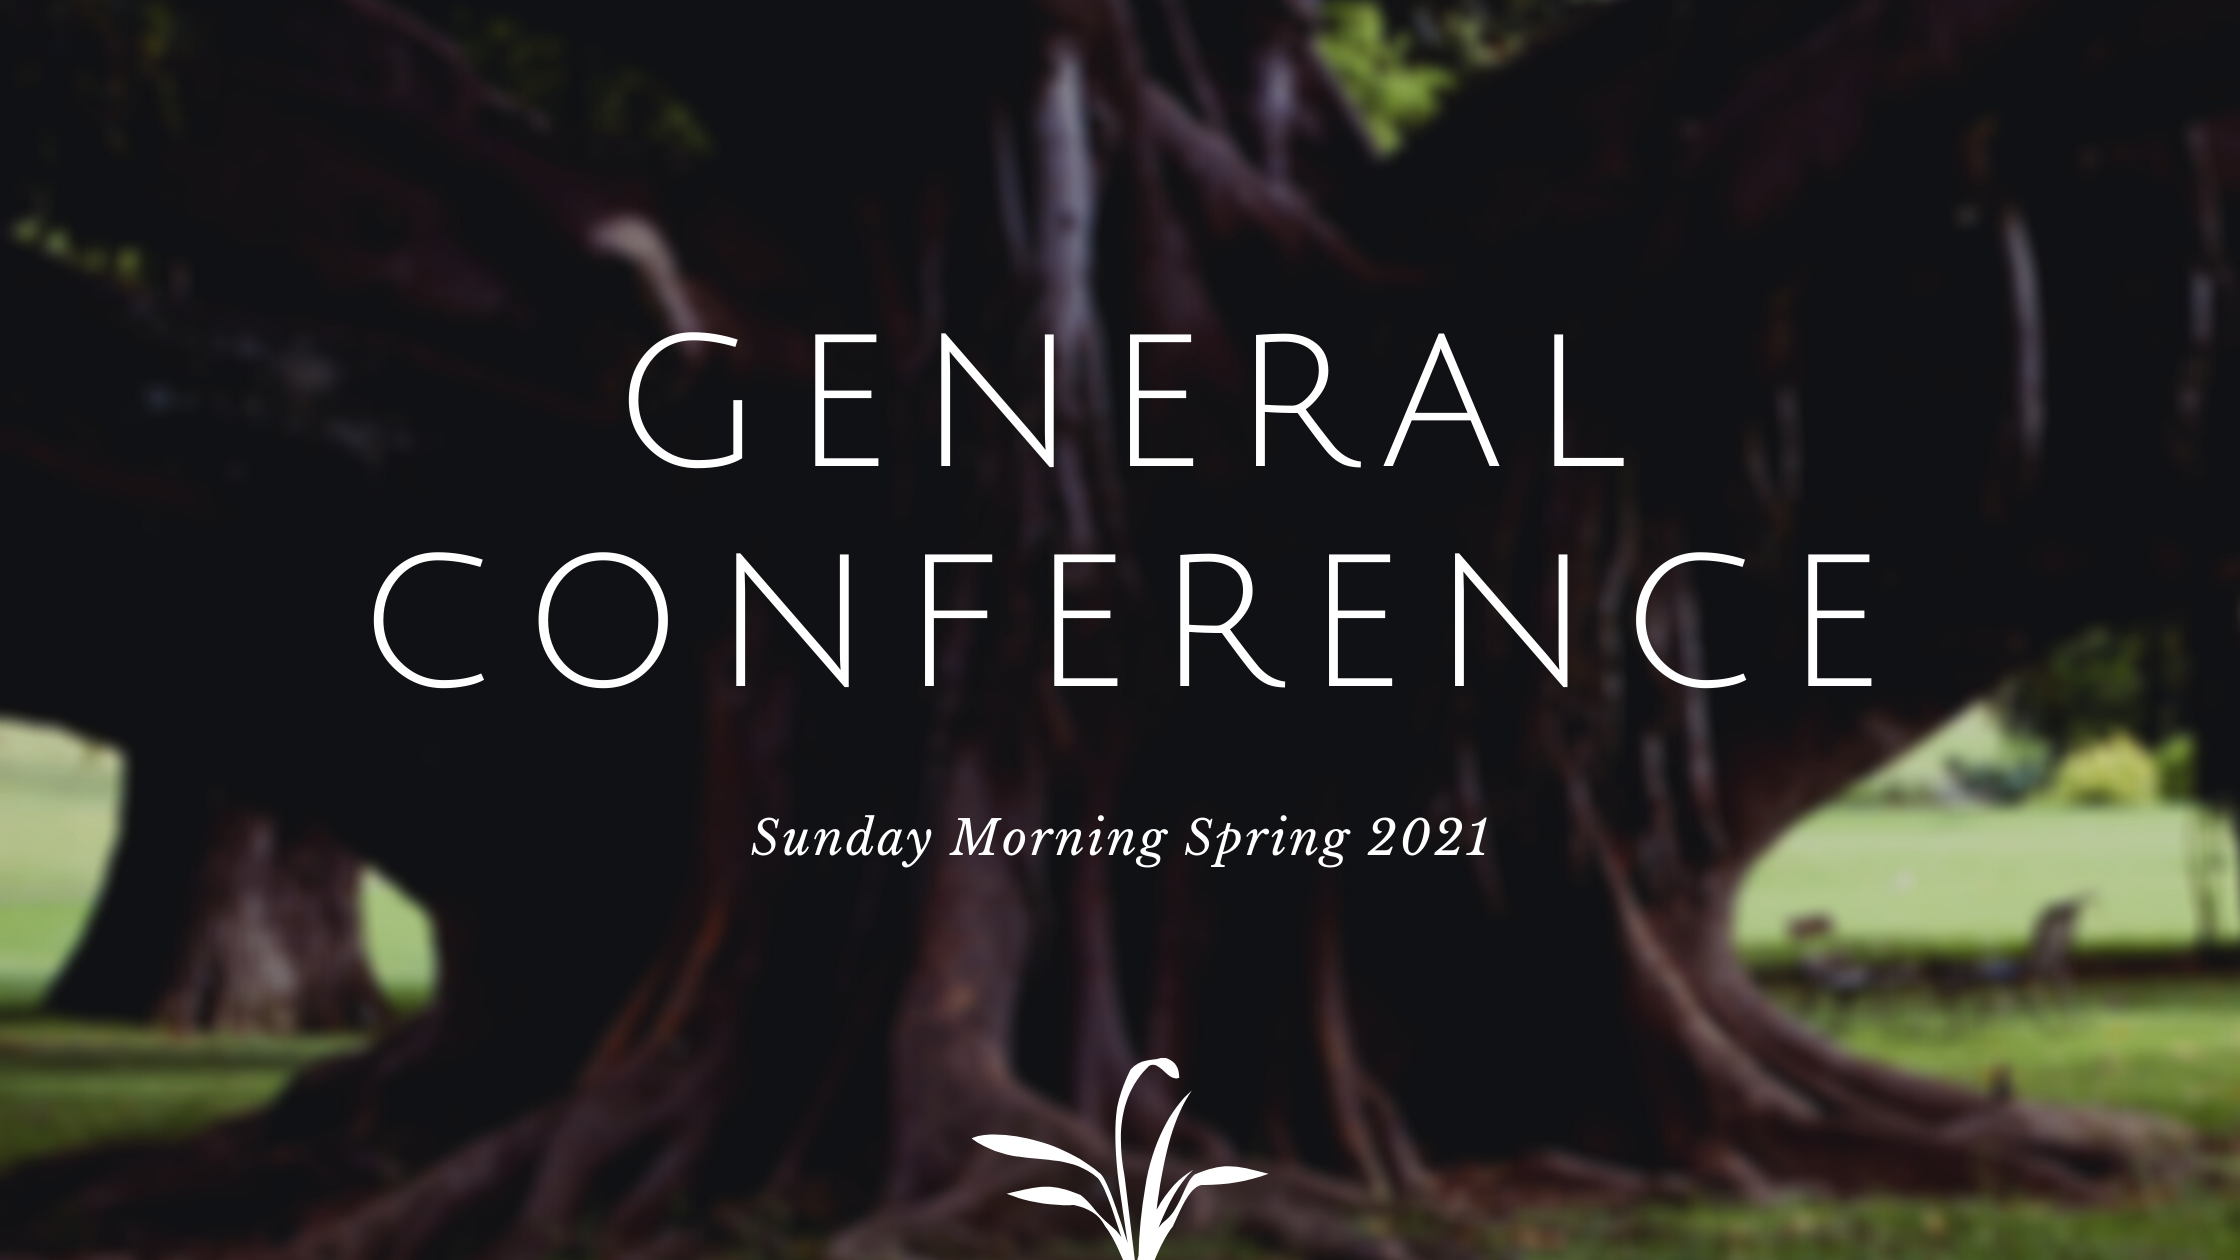 Top 17 Tweets From the Sunday Morning Session Spring 2021’s General Conference